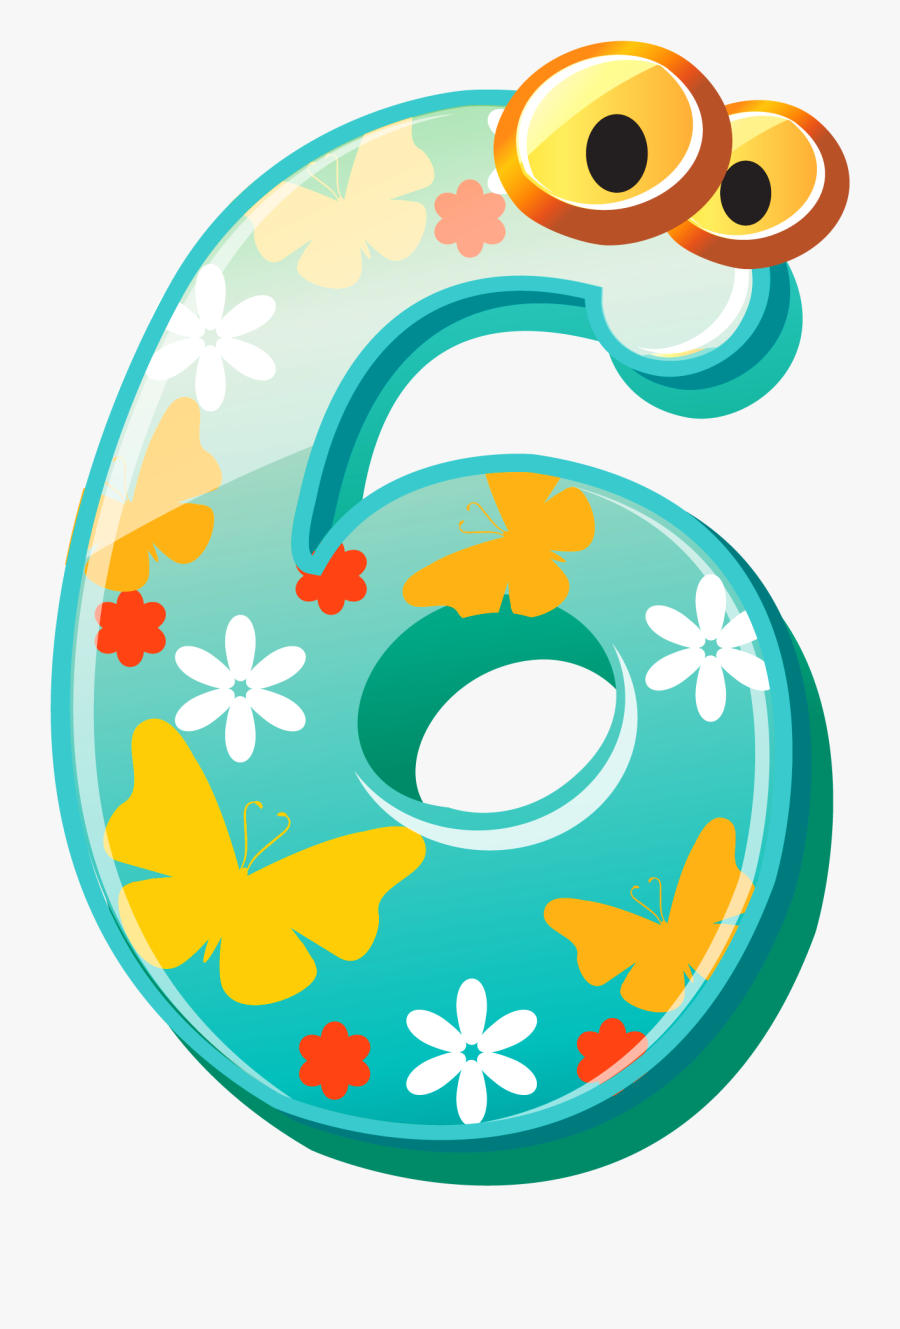 Cute Six Png Image - Cute Numbers Clipart, Transparent Clipart